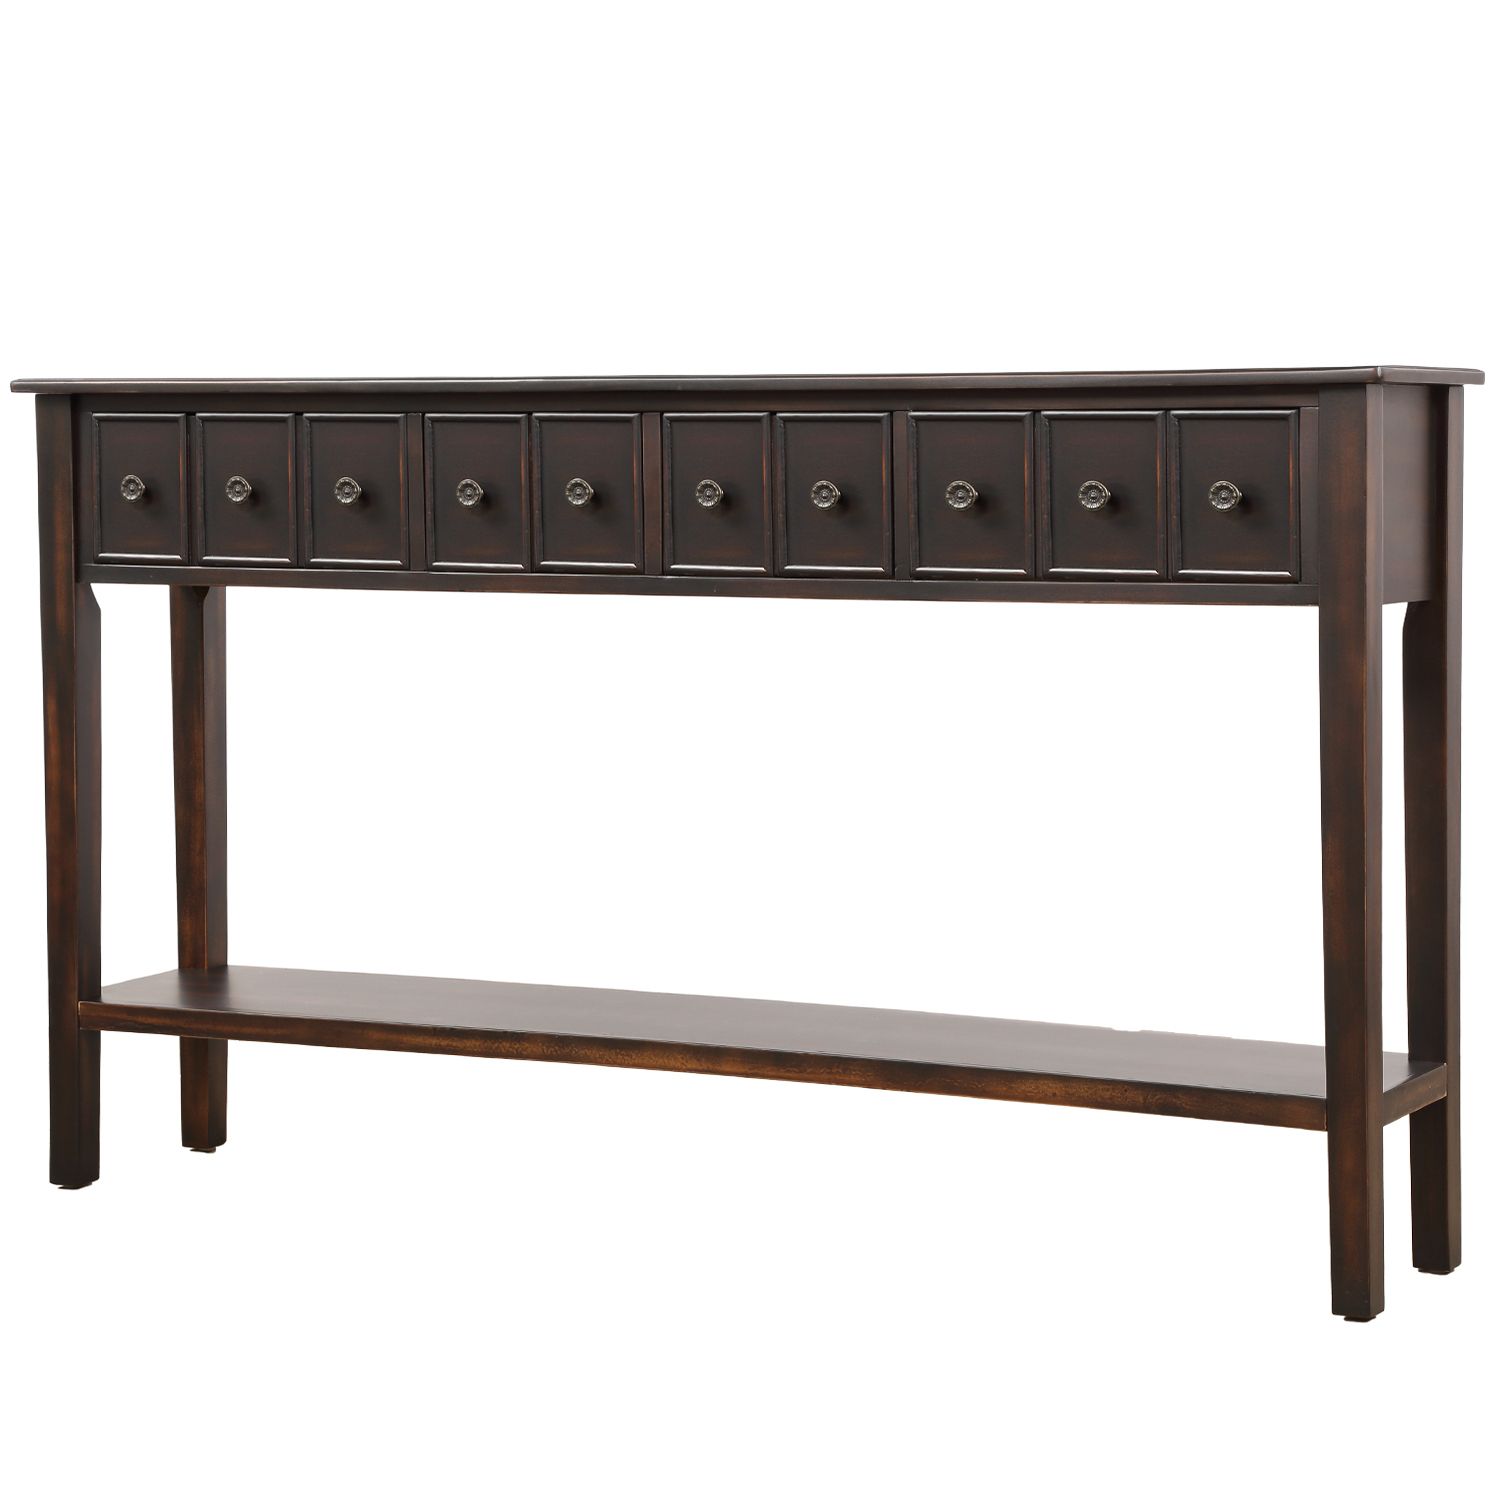 Rustic Entryway Console Table, 60" Long Sofa Table With With Regard To Black Wood Storage Console Tables (View 20 of 20)